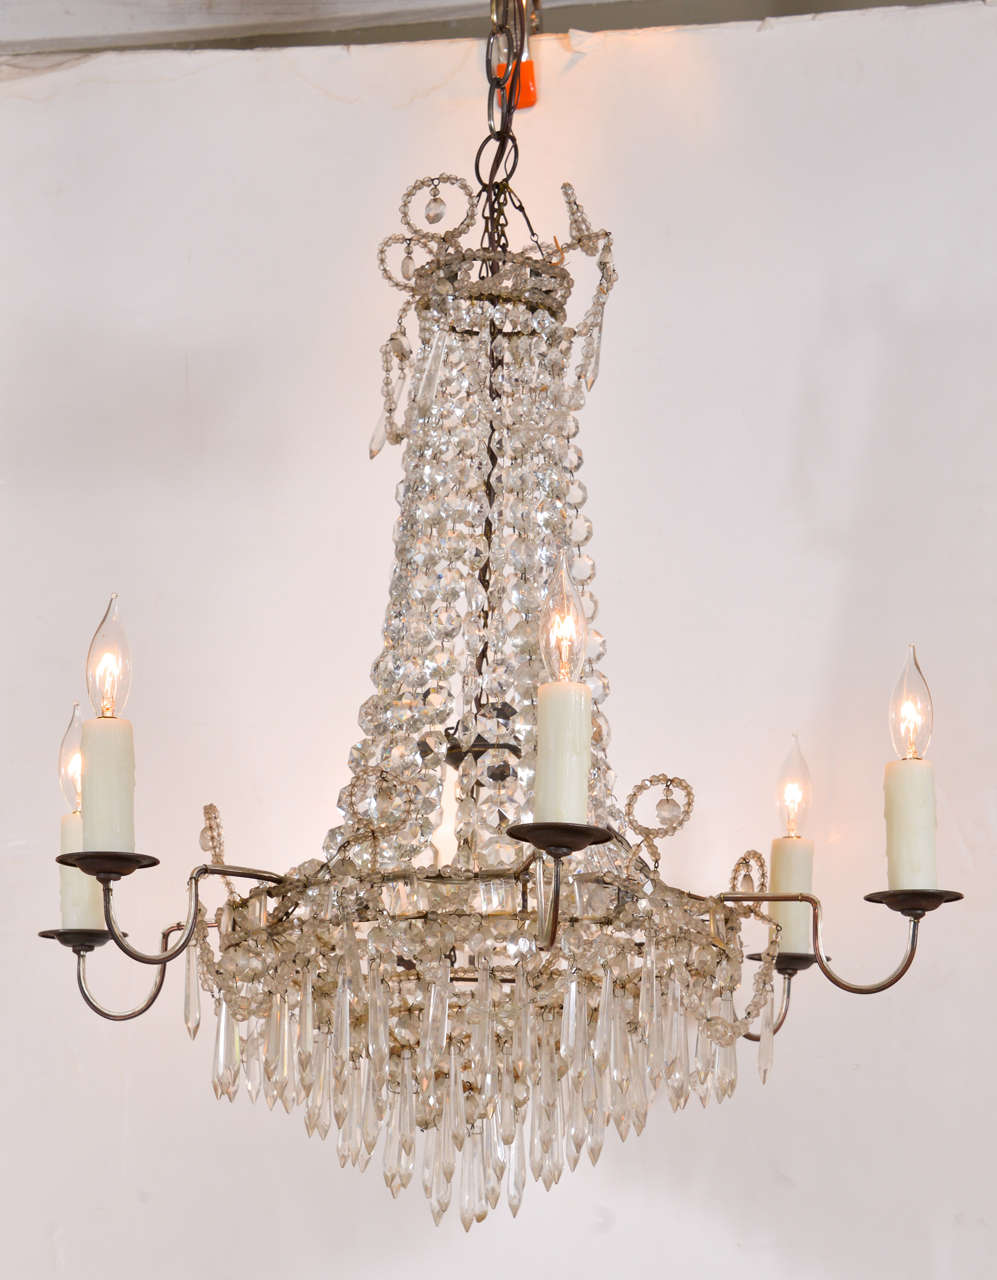 Six arms on each chandelier.
Graceful shaped body of chandelier.
Delicate decoration on crown.